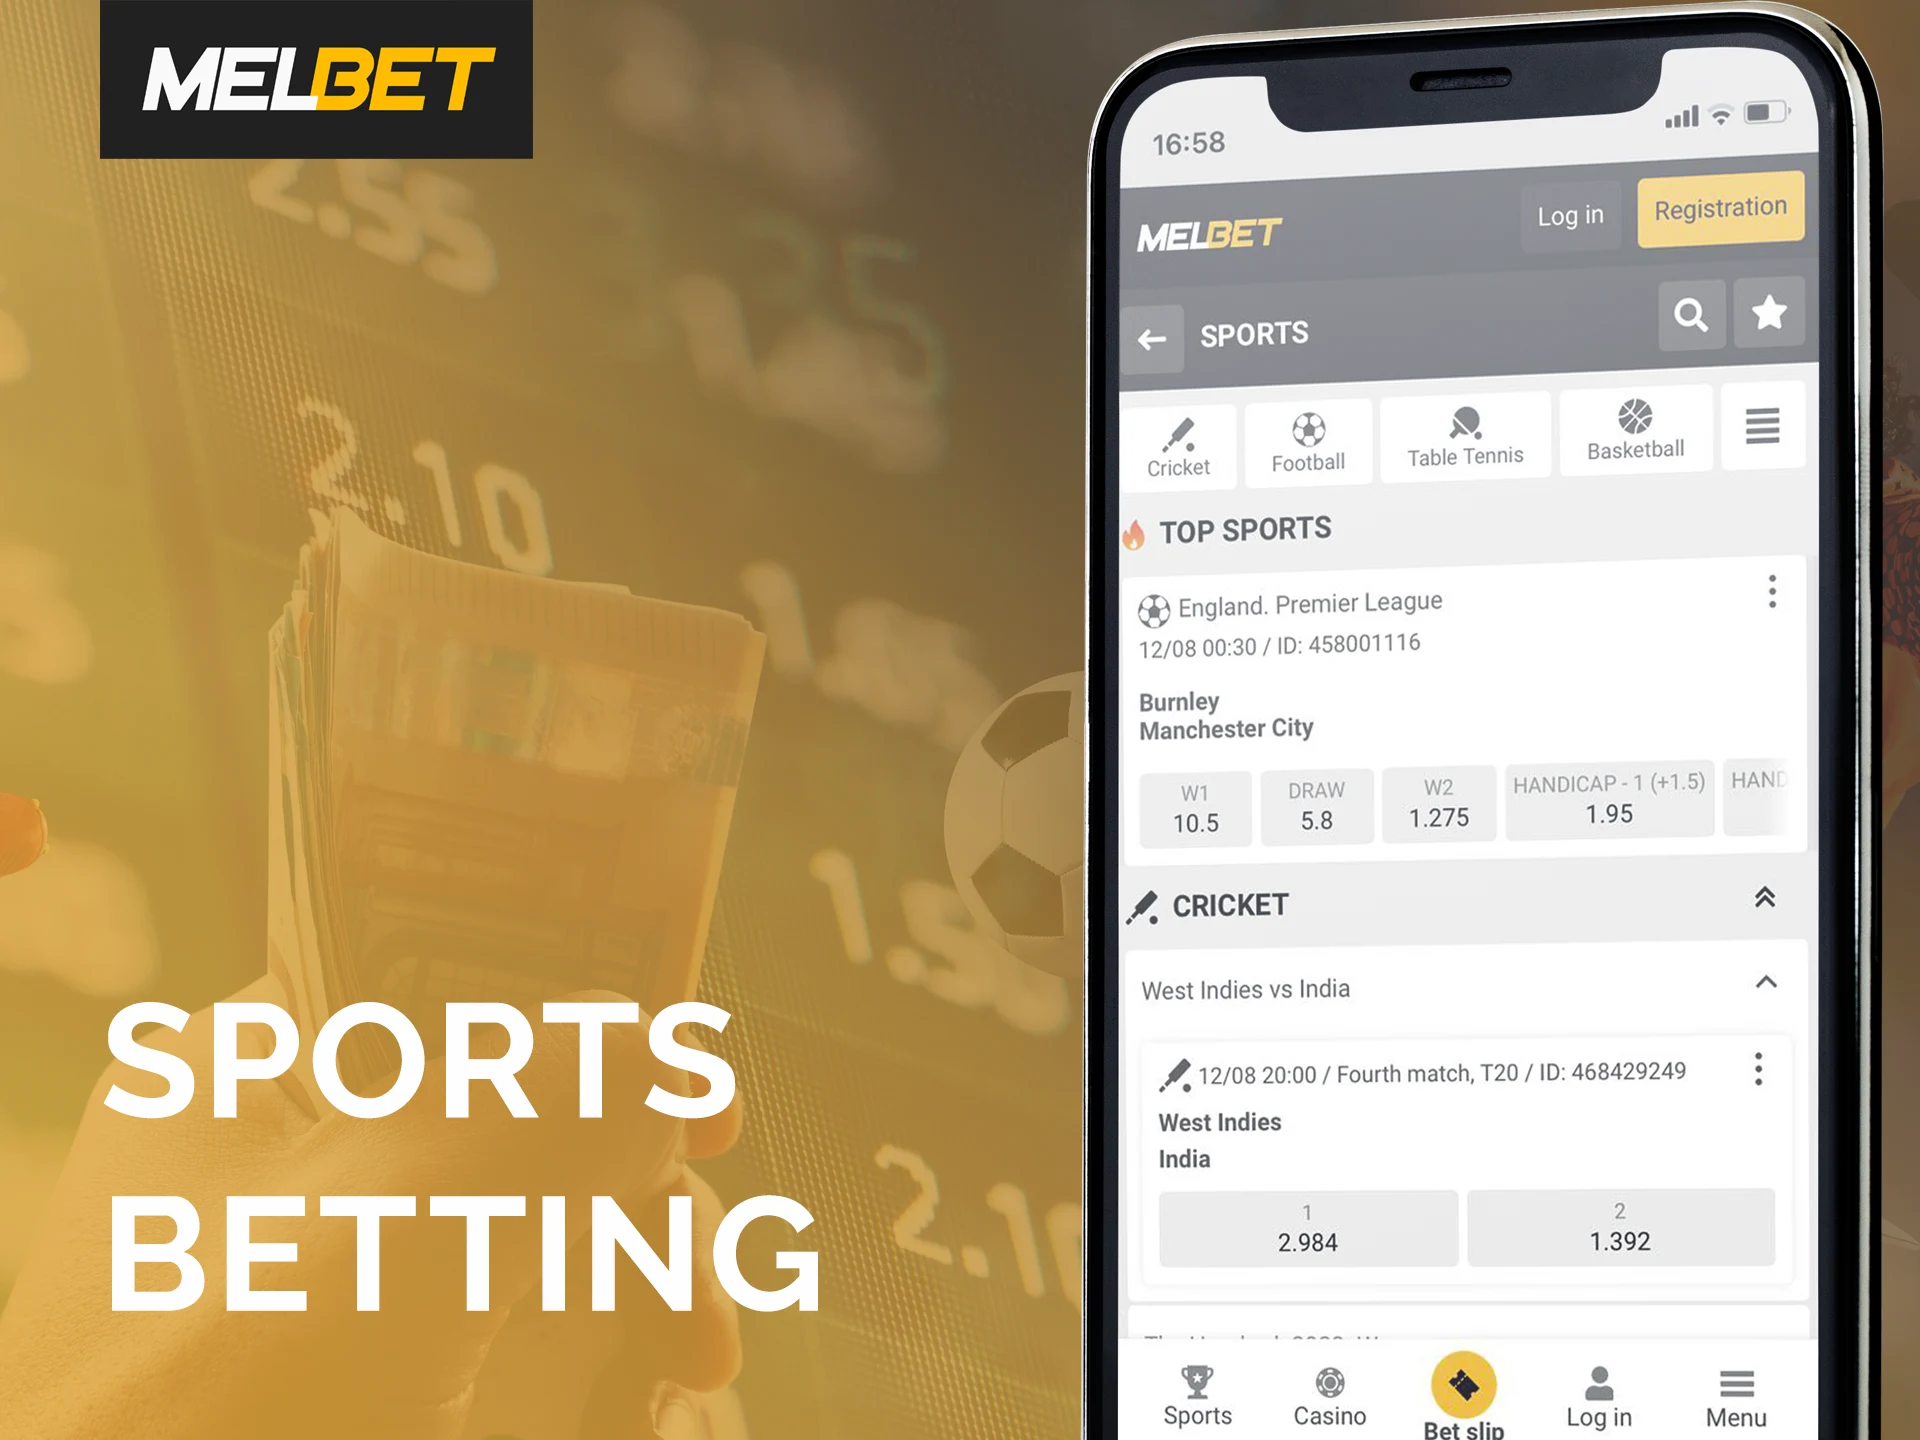 Make bets on your favorite sports.